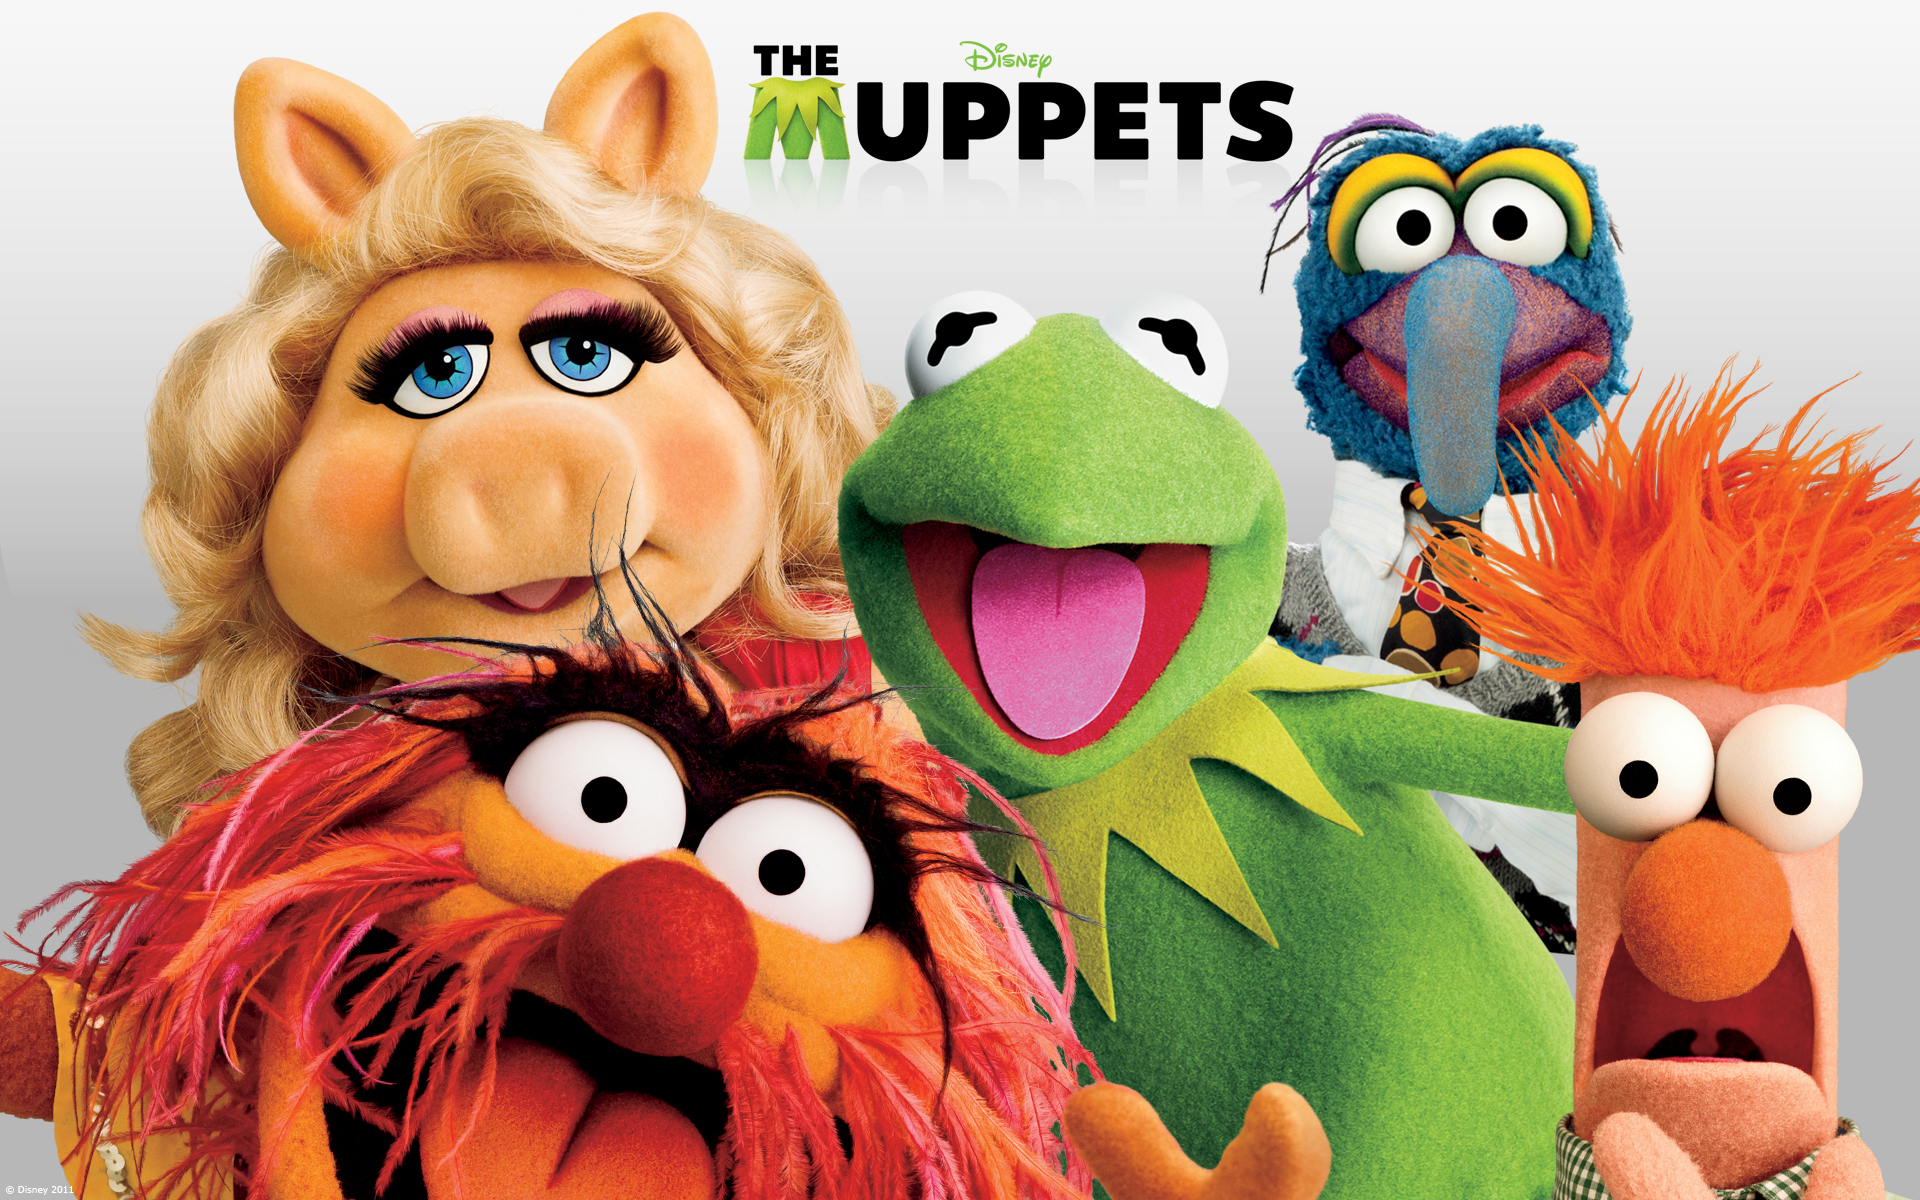 HQ The Muppets Wallpapers | File 2093.21Kb